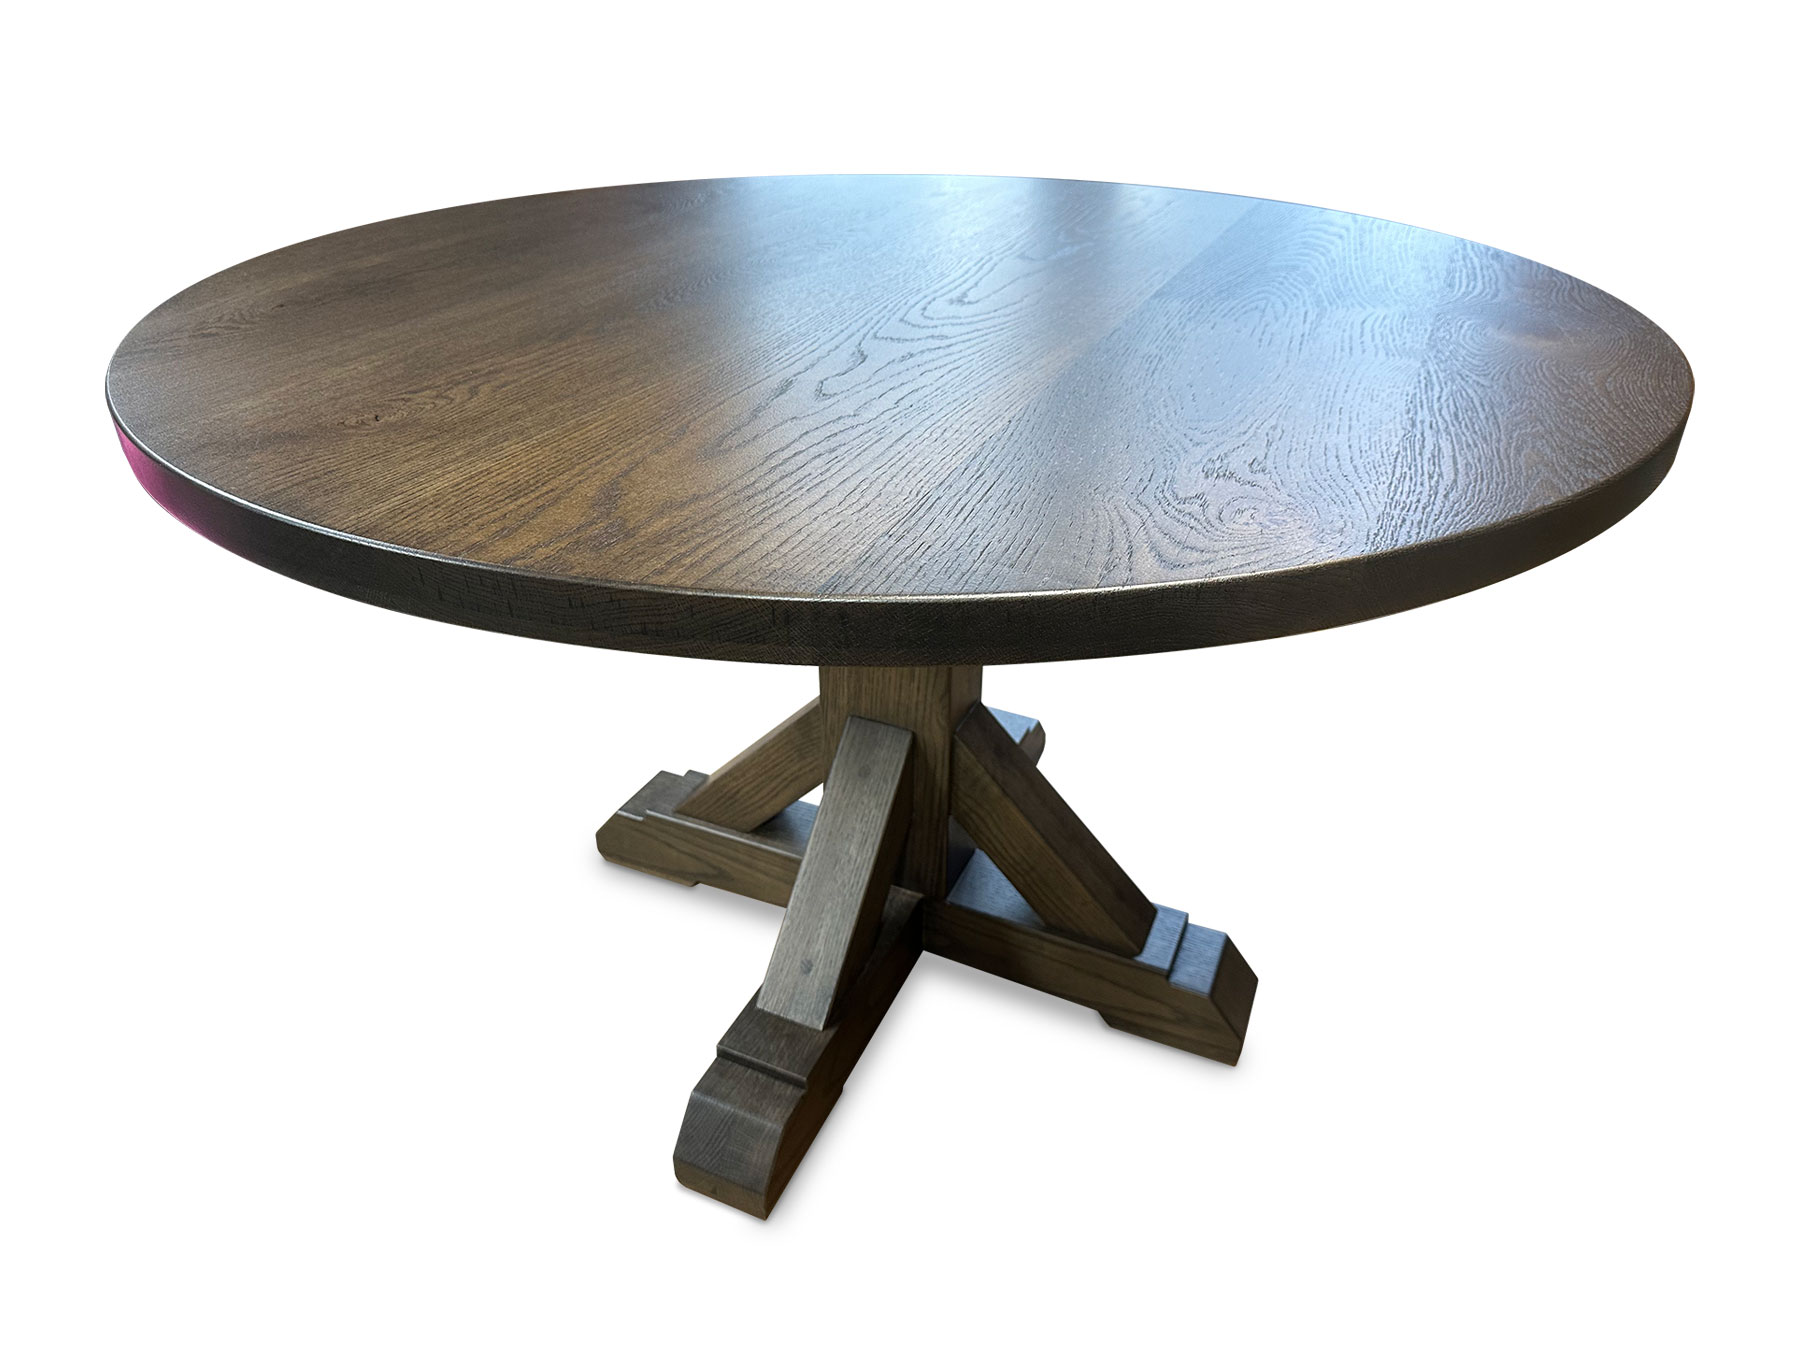 The Moscati Round Pedestal table